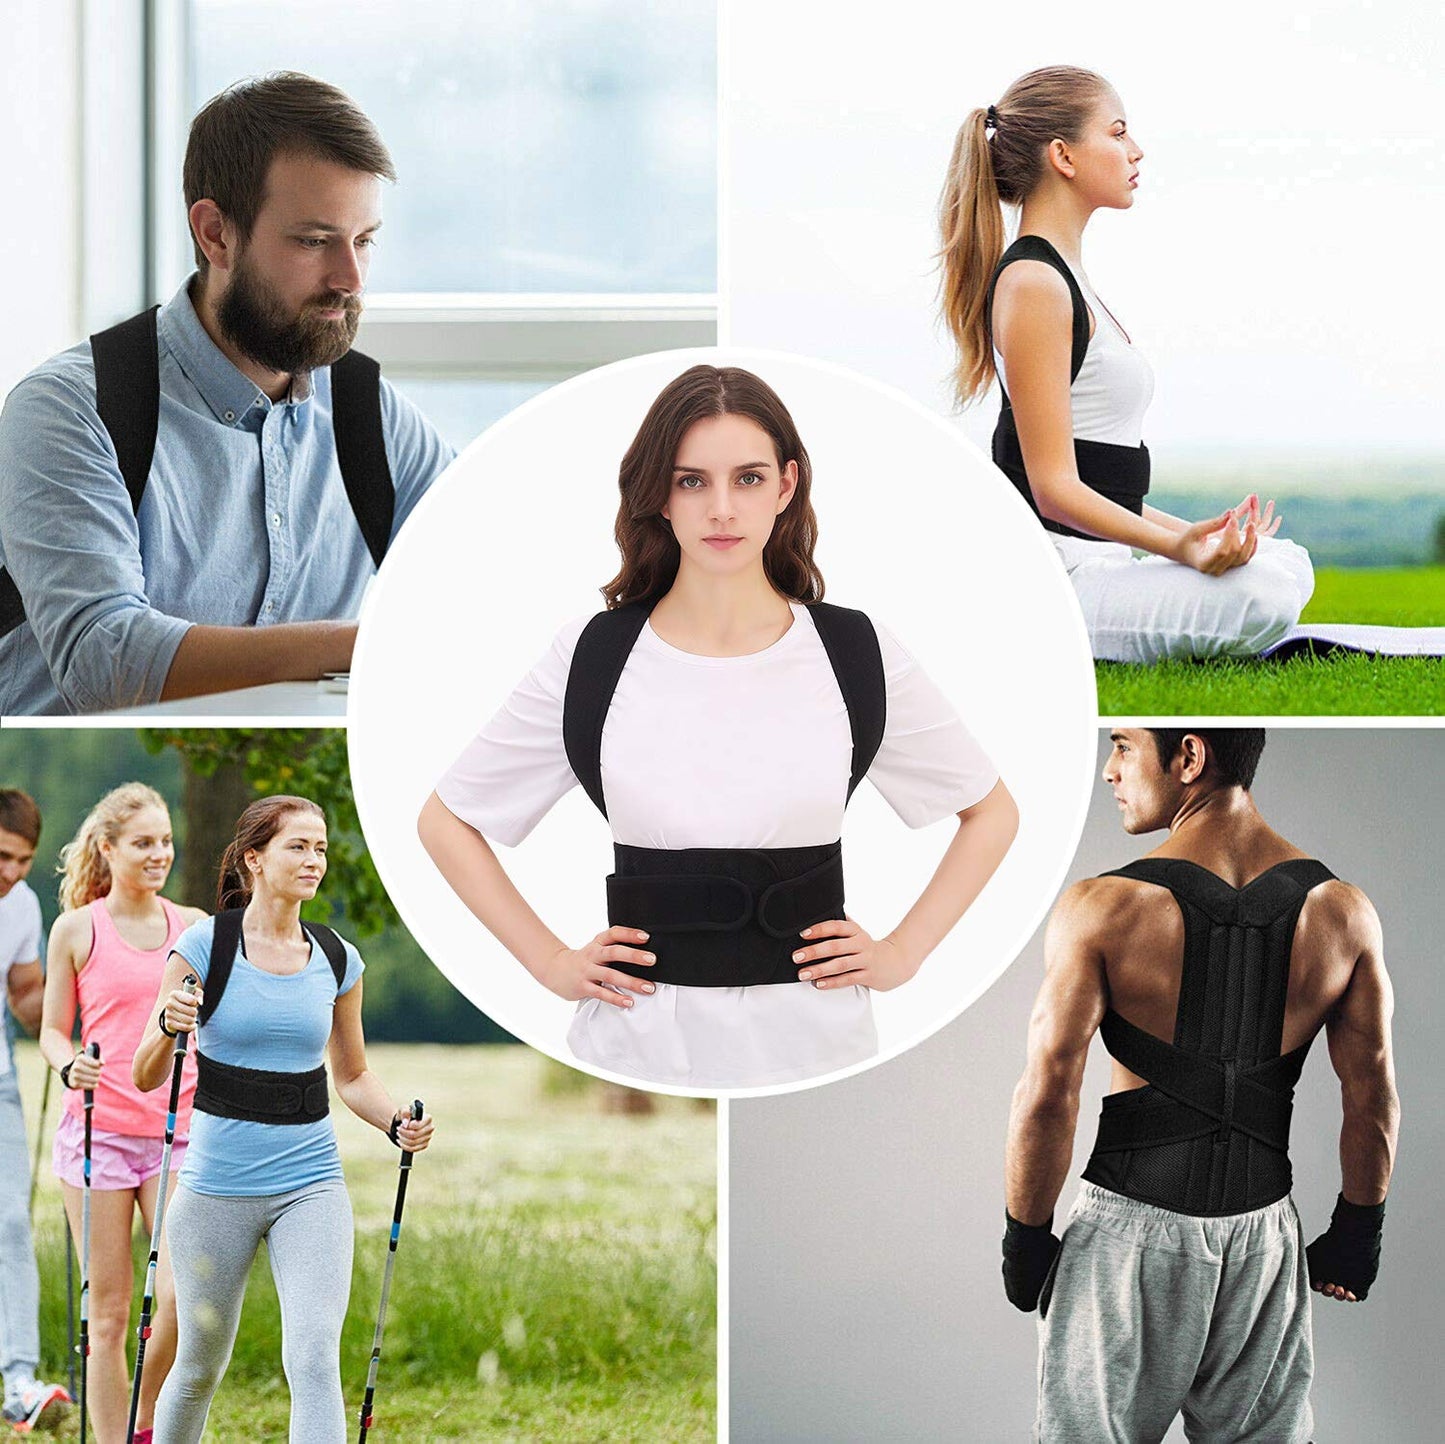 Posture Corrector Back Brace Clavicle Support Hunching Trainer